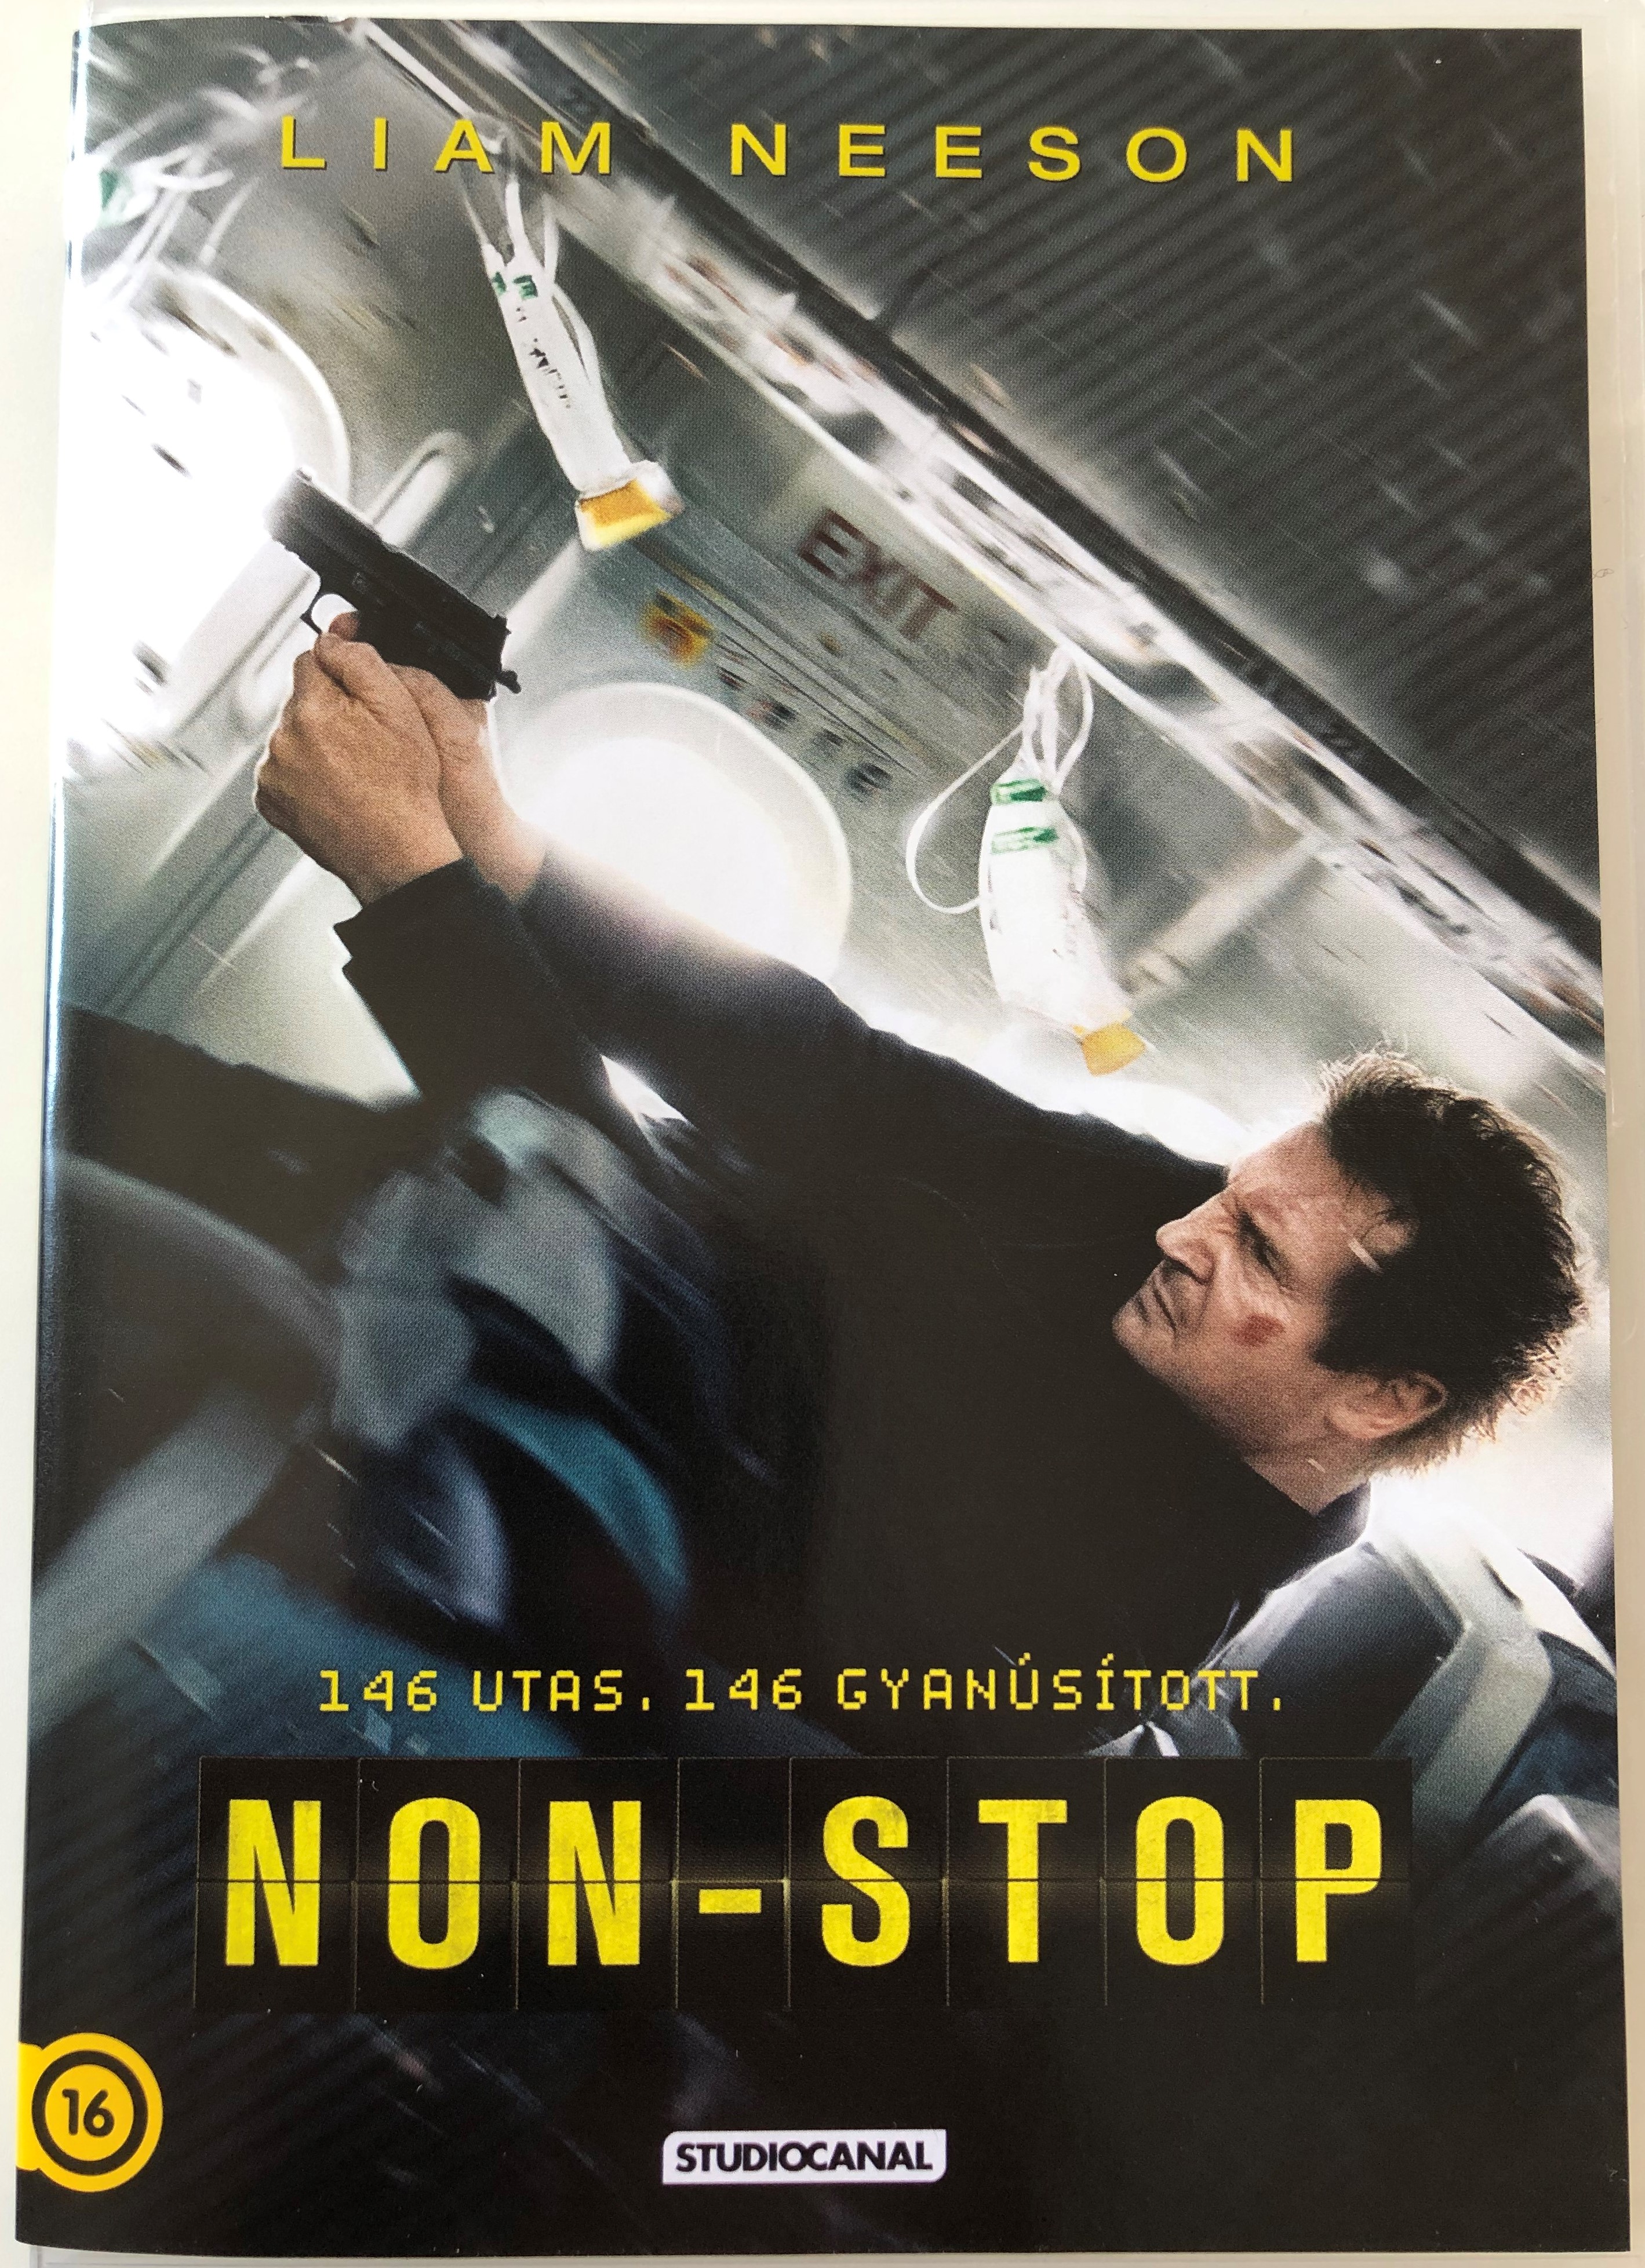 Non-Stop DVD 2014 - Directed by Jaume Collet-Serra 1